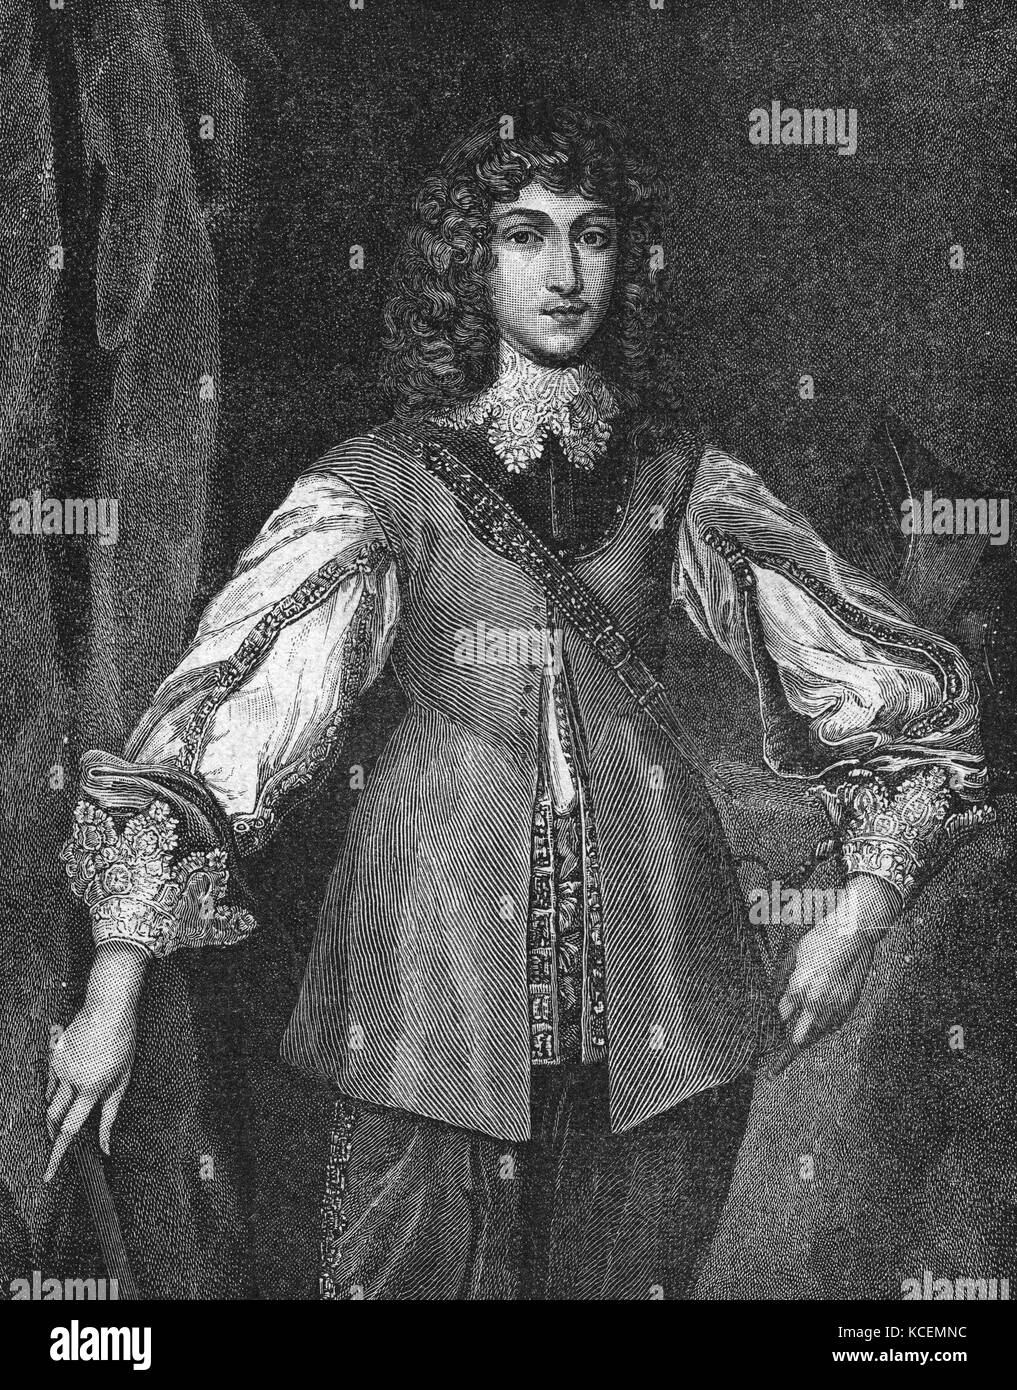 Rupert, Count Palatine of the Rhine, Duke of Bavaria, Duke of Cumberland, Earl of Holderness (1619 – 1682), was a noted German soldier, admiral, scientist, sportsman, colonial governor and amateur artist during the 17th century. Stock Photo